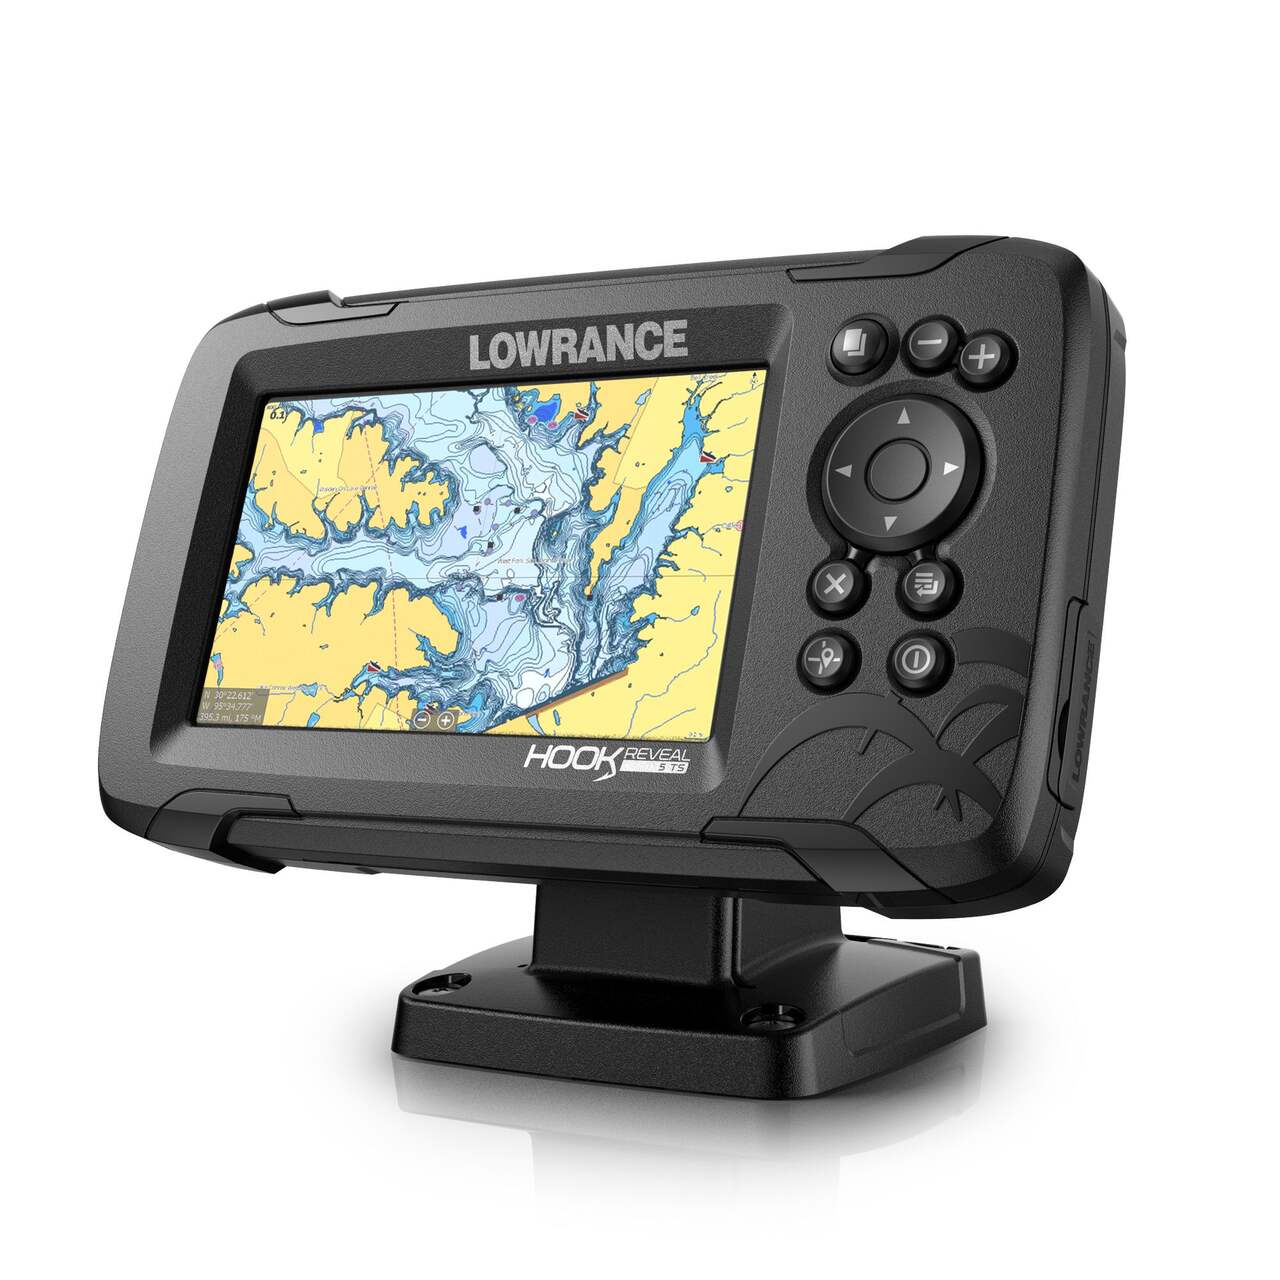 https://media-www.canadiantire.ca/product/playing/fishing/fishing-equipment/1785197/lowrance-hook-reveal-5-split-shot-c-map-9392ef1e-0a66-47d3-b7a1-d81335166b5c-jpgrendition.jpg?imdensity=1&imwidth=1244&impolicy=mZoom